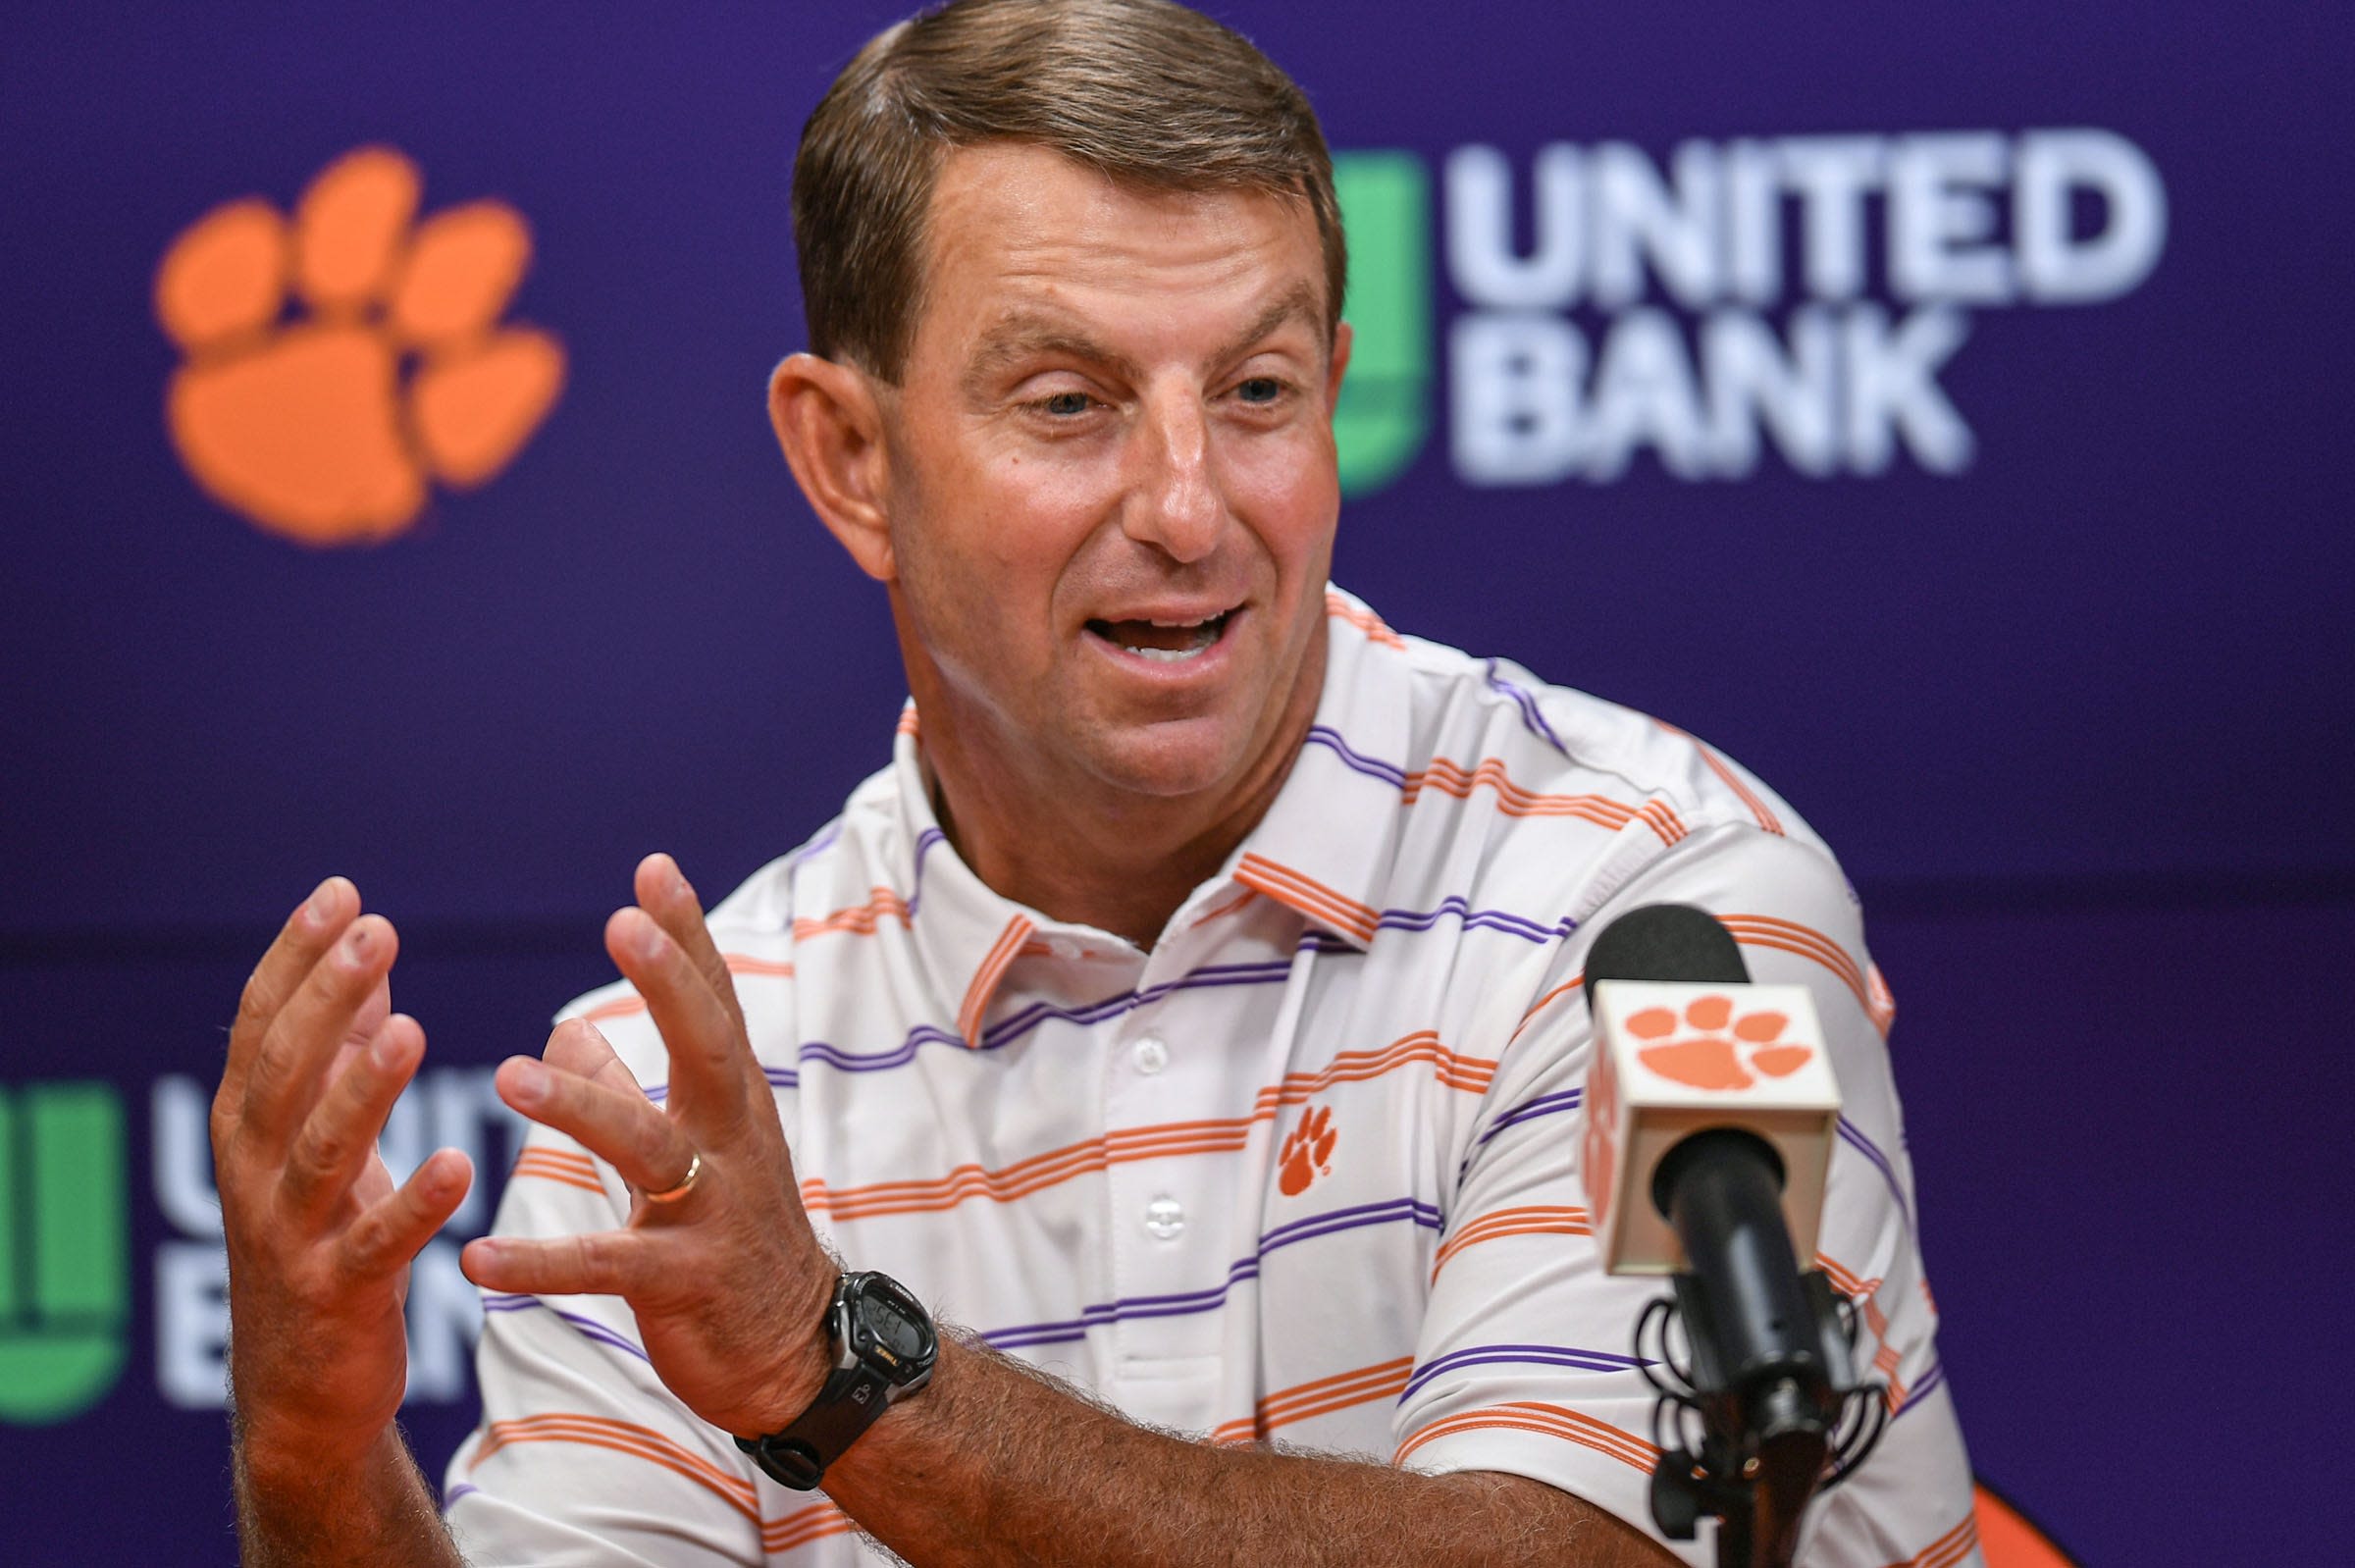 Dabo Swinney explains rejecting ESPN, ACC request to move Clemson-South Carolina game to Black Friday